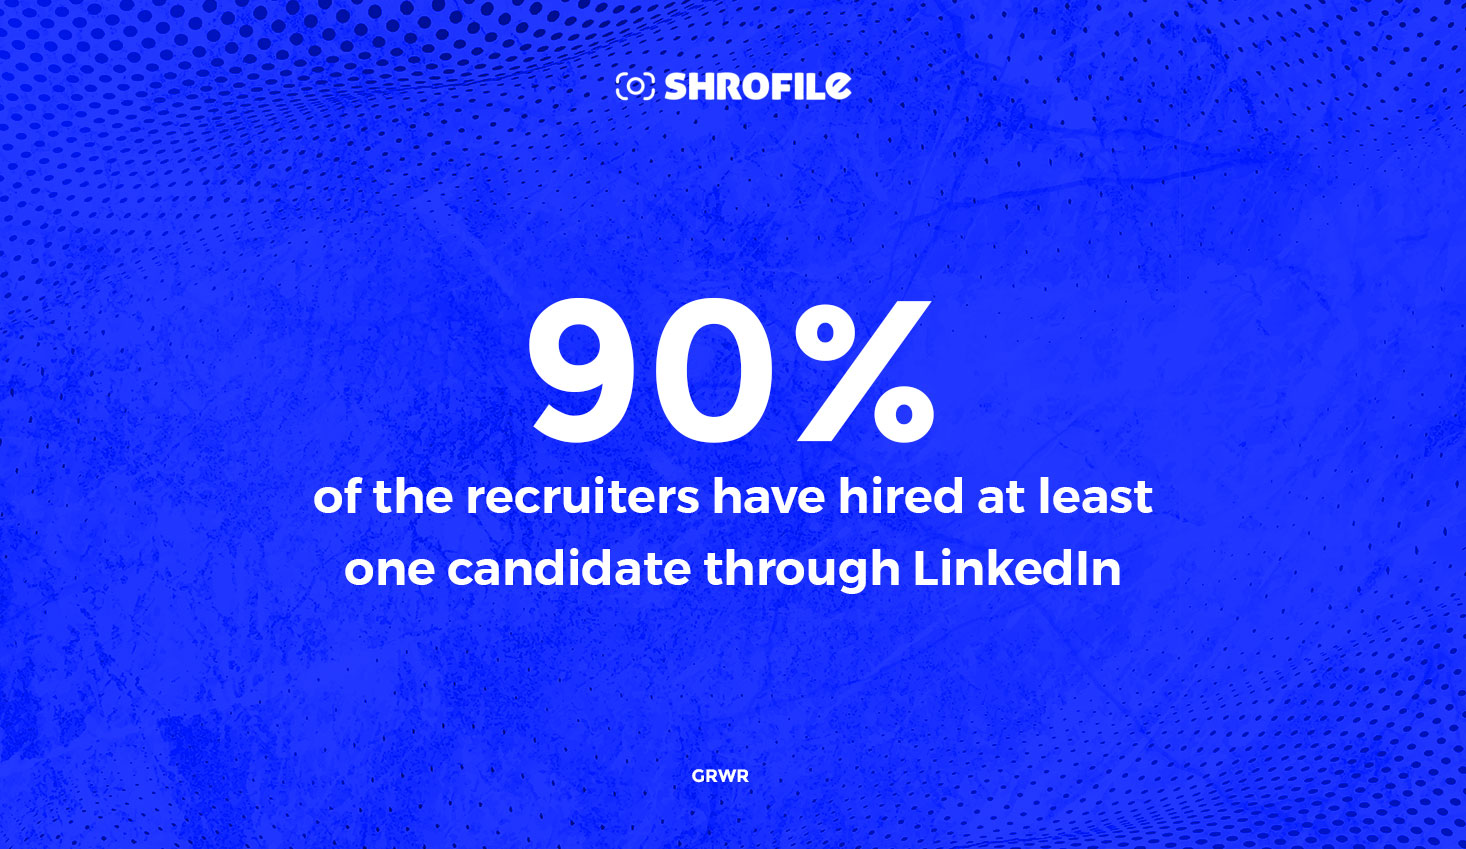 90% of the recruiters have hired at least one candidate through LinkedIn